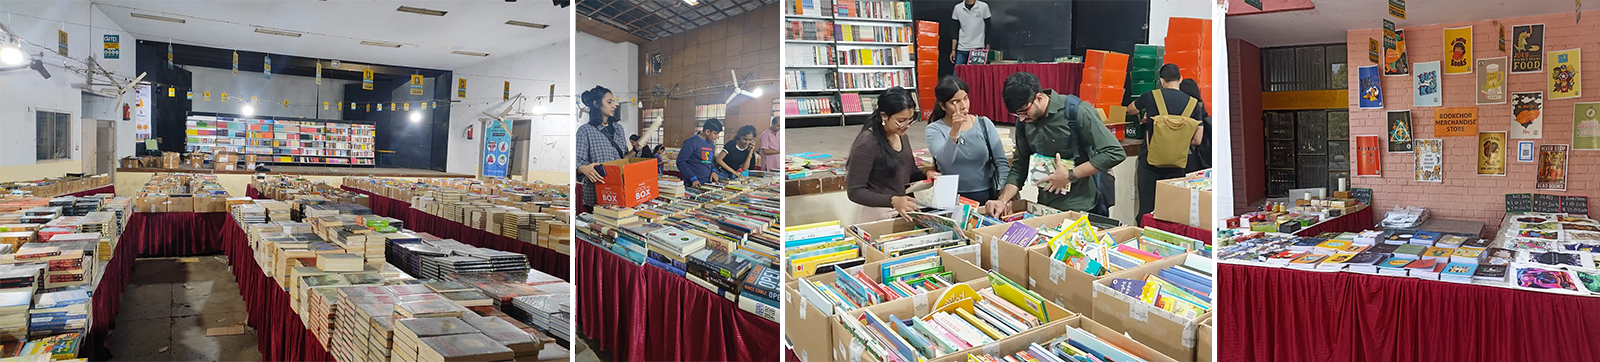 A shout to book lovers: Bookchor is back with ‘Lock the box’ in Sector 15, Chandigarh